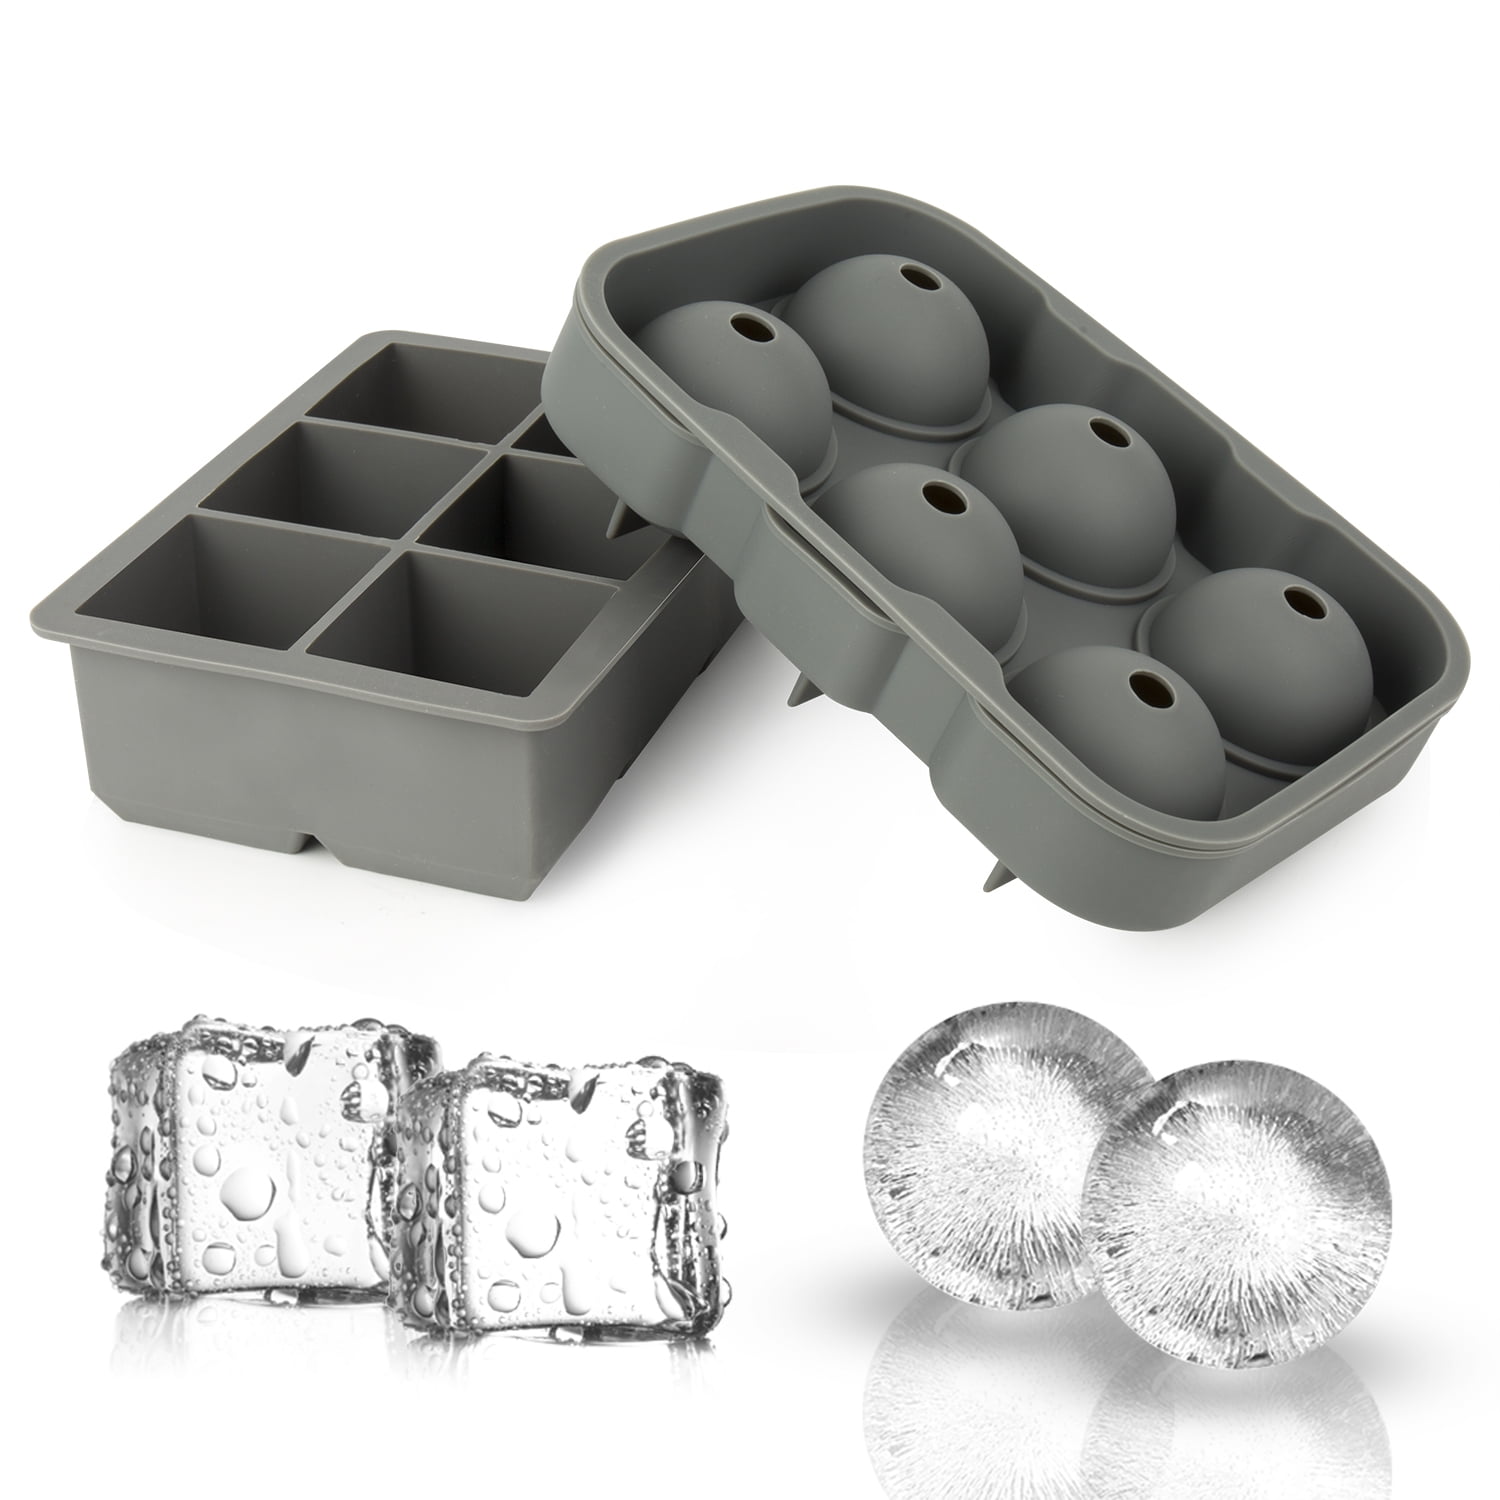 Adoric Silicone Ice Cube Trays set - Adoric Ice Cube Trays Silicone Set of  2, Sphere Ice Ball Maker with Lid and Large Square Ice Cube Molds for  Whiskey, Reusable and BPA Free